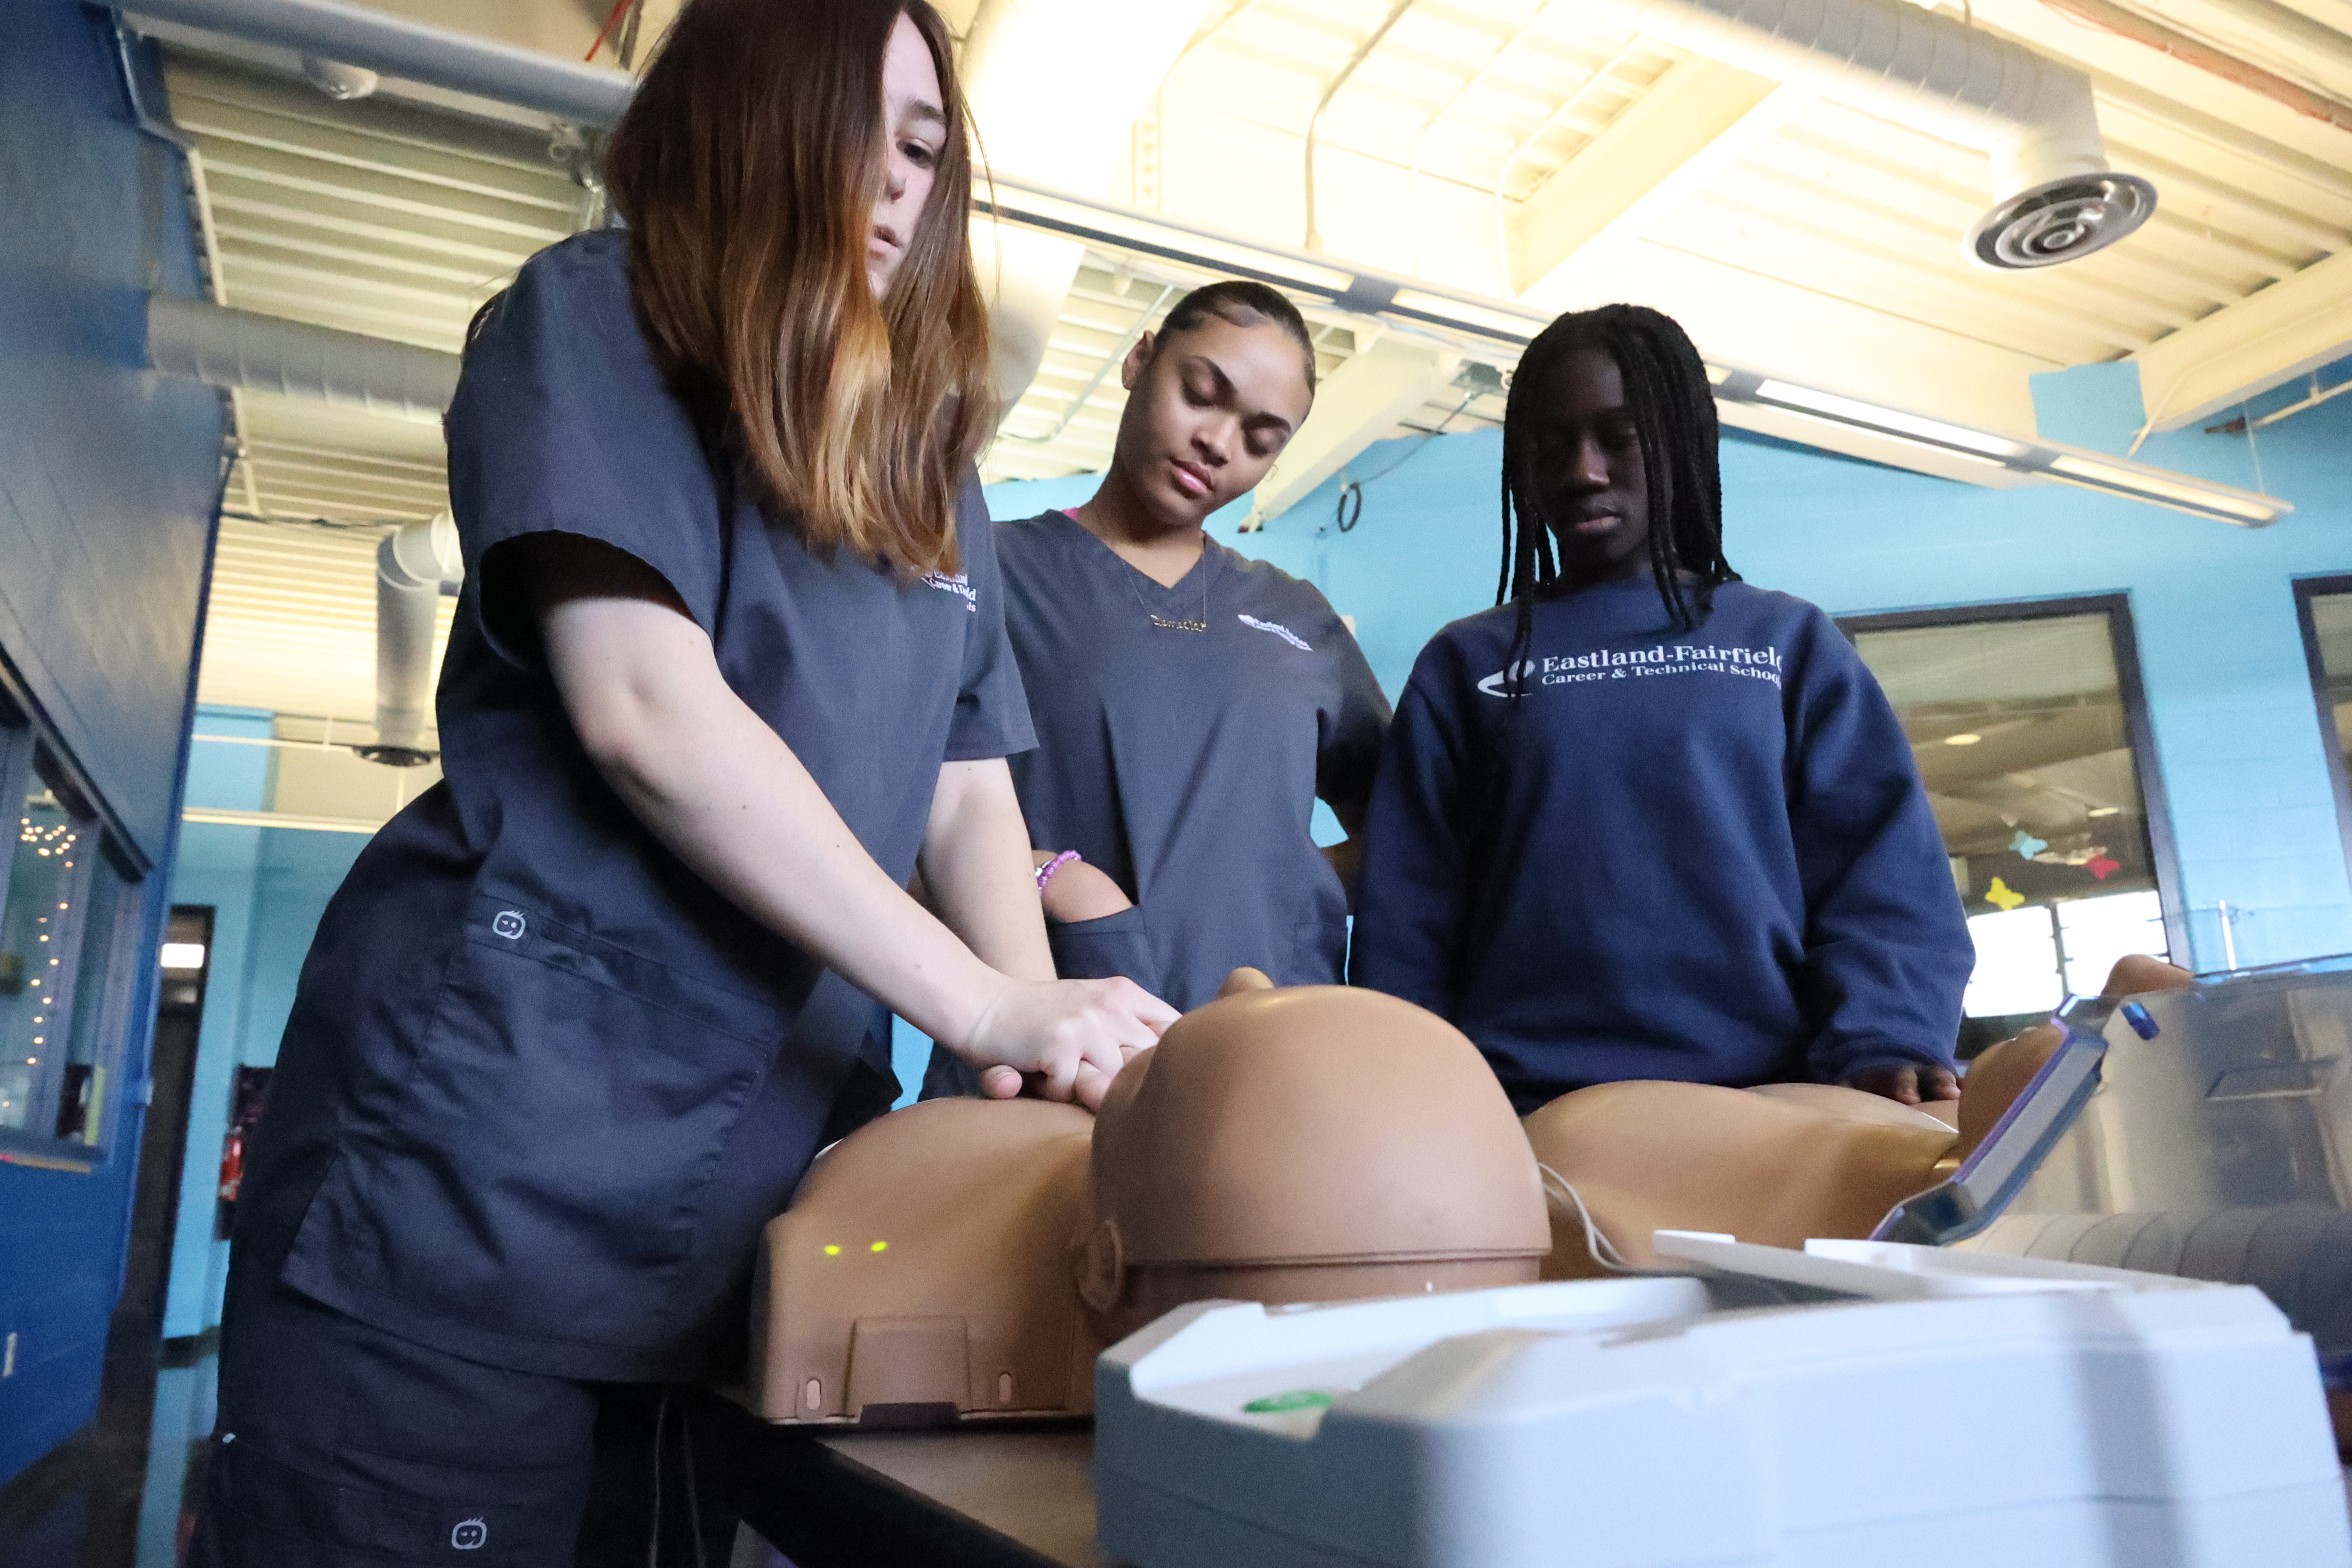 A group of students huddle around CPR training devices as one student applies compressions.